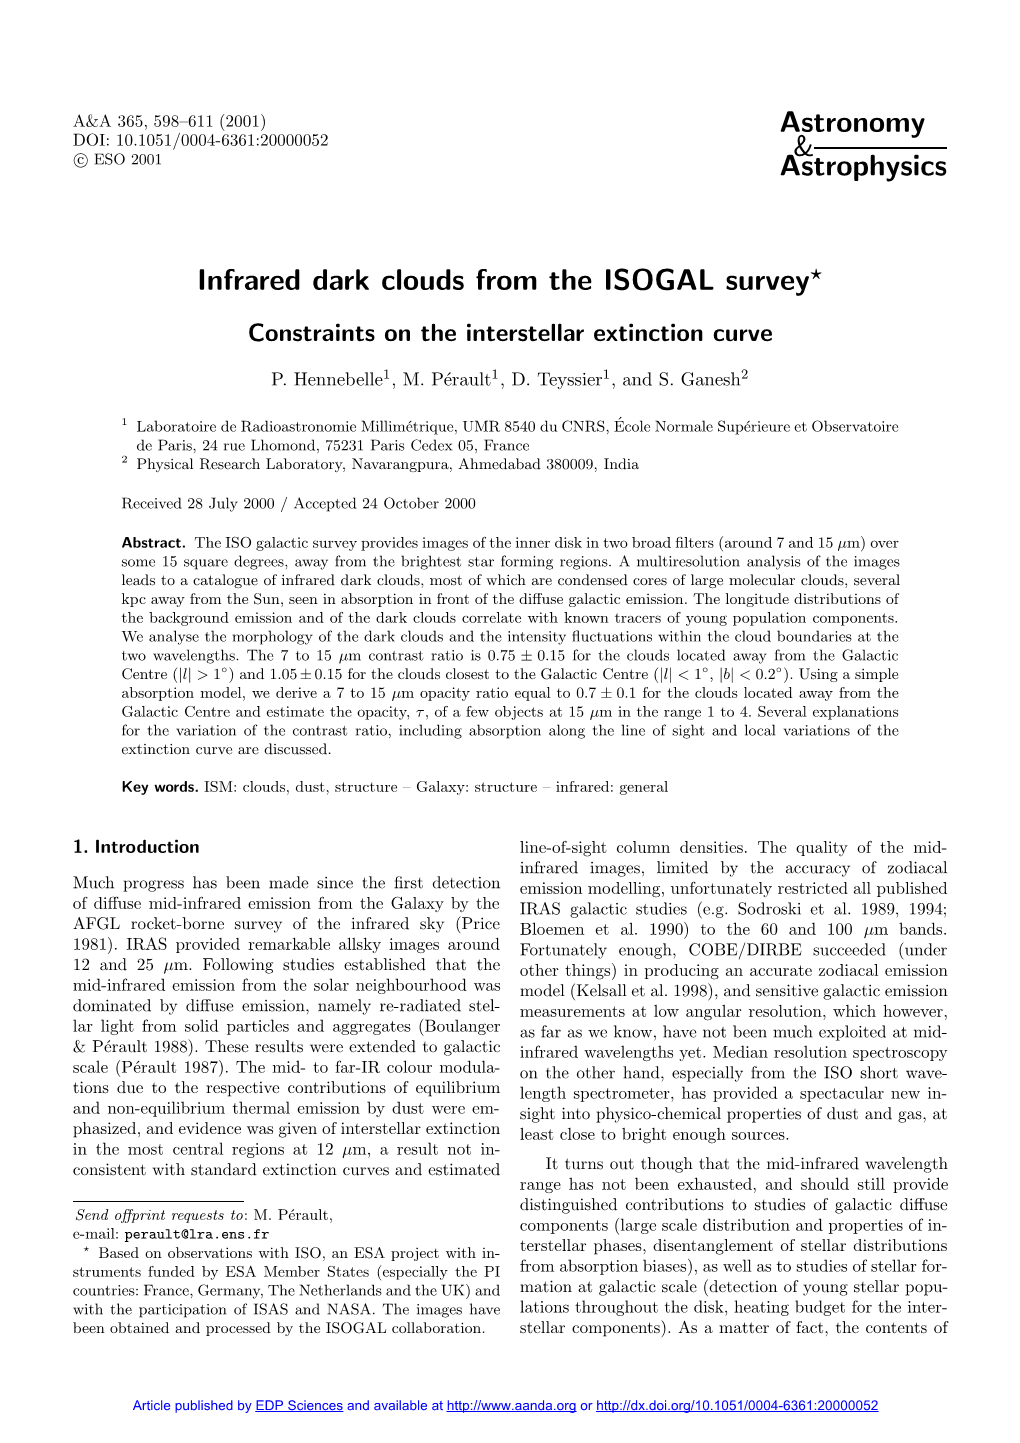 Infrared Dark Clouds from the ISOGAL Survey?